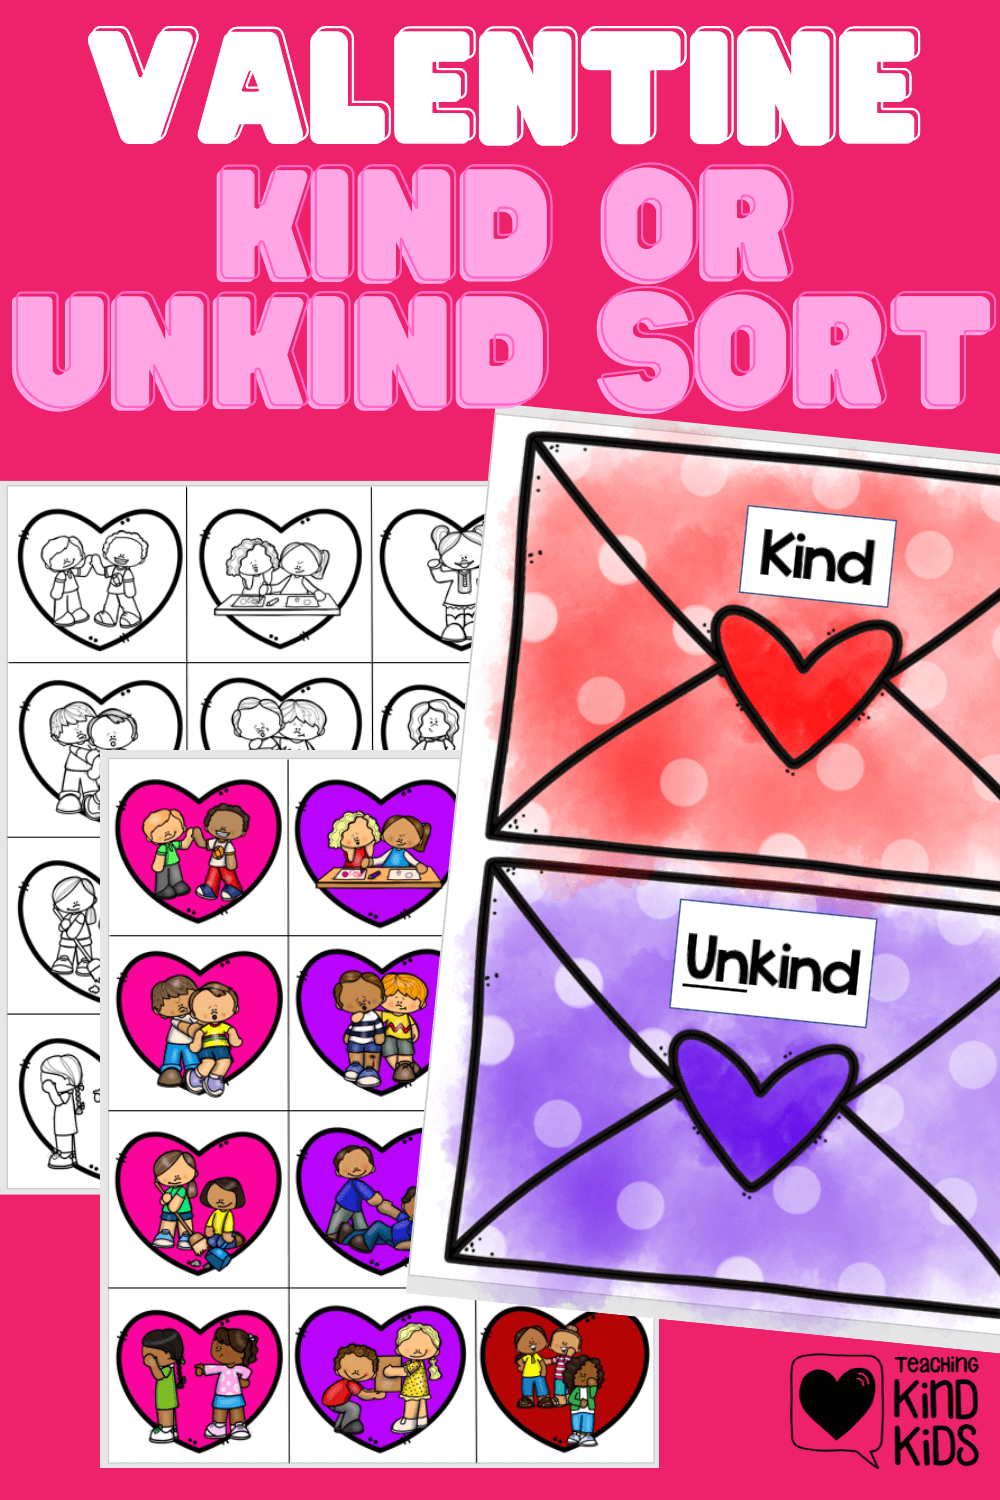 Use this Valentine Kindness Activity that's perfect for kids to help decide what is kind and what is not this Valentine's Day.